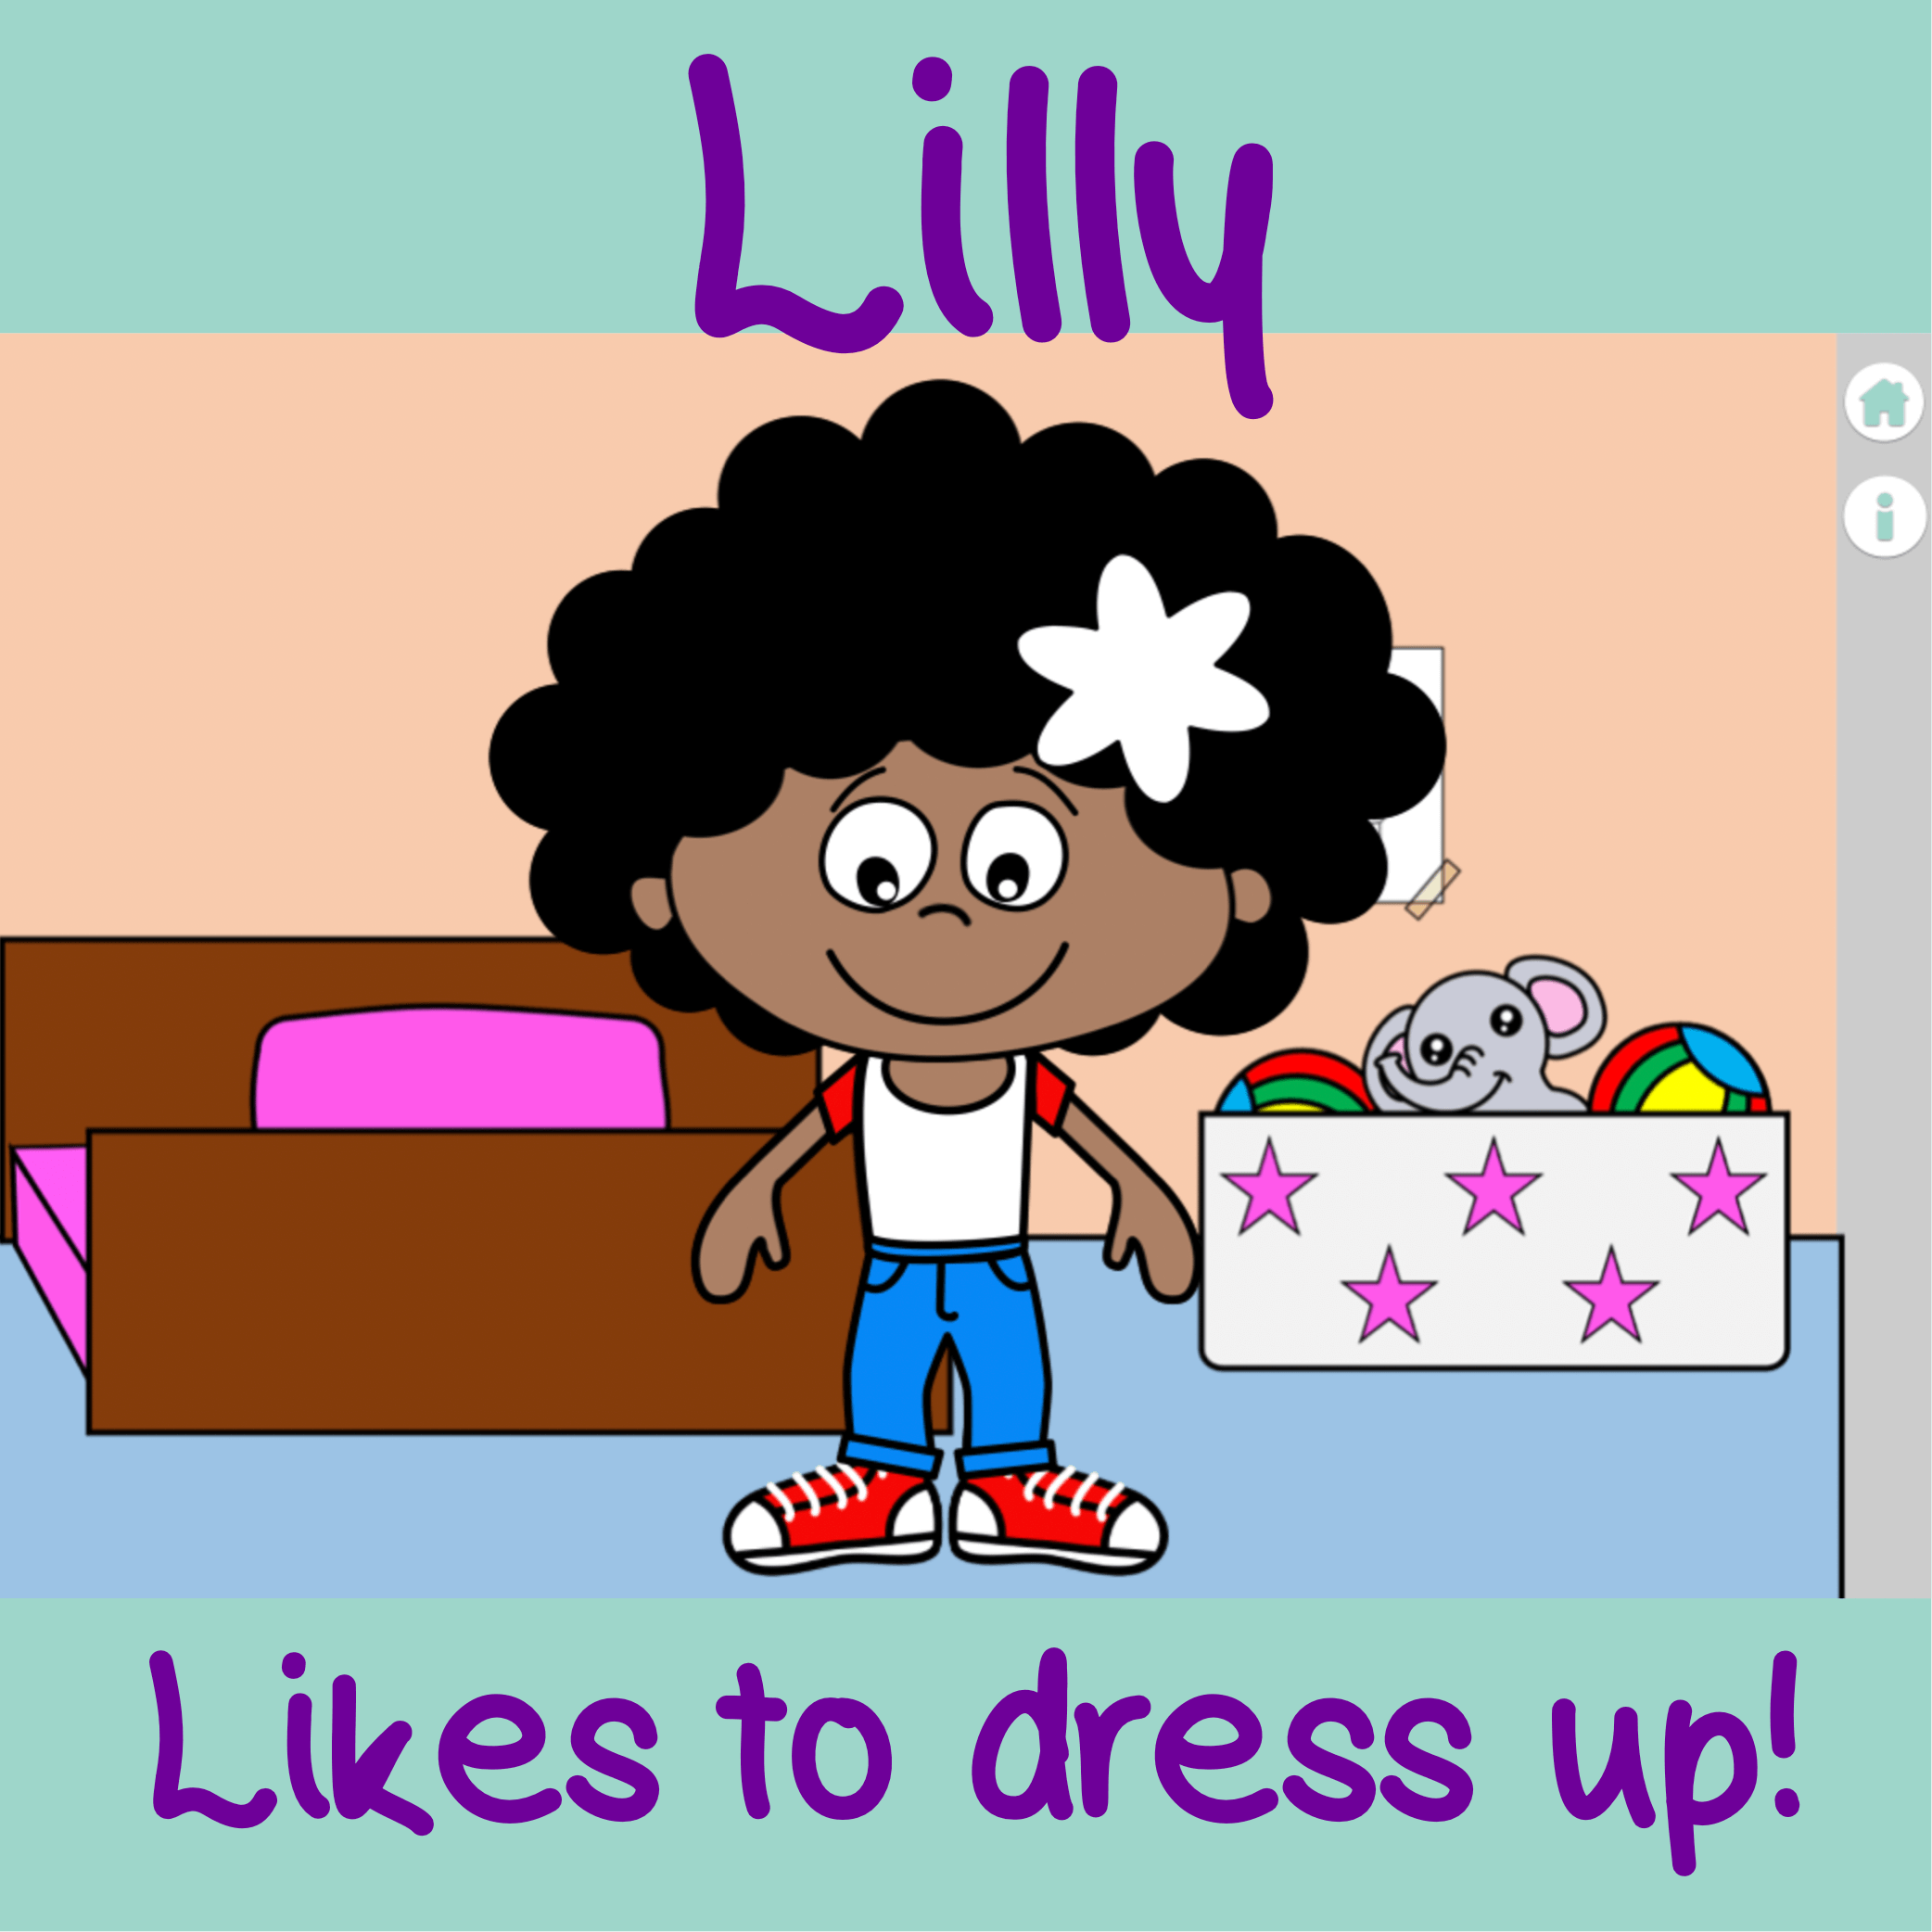 Lilly Likes to dress up!